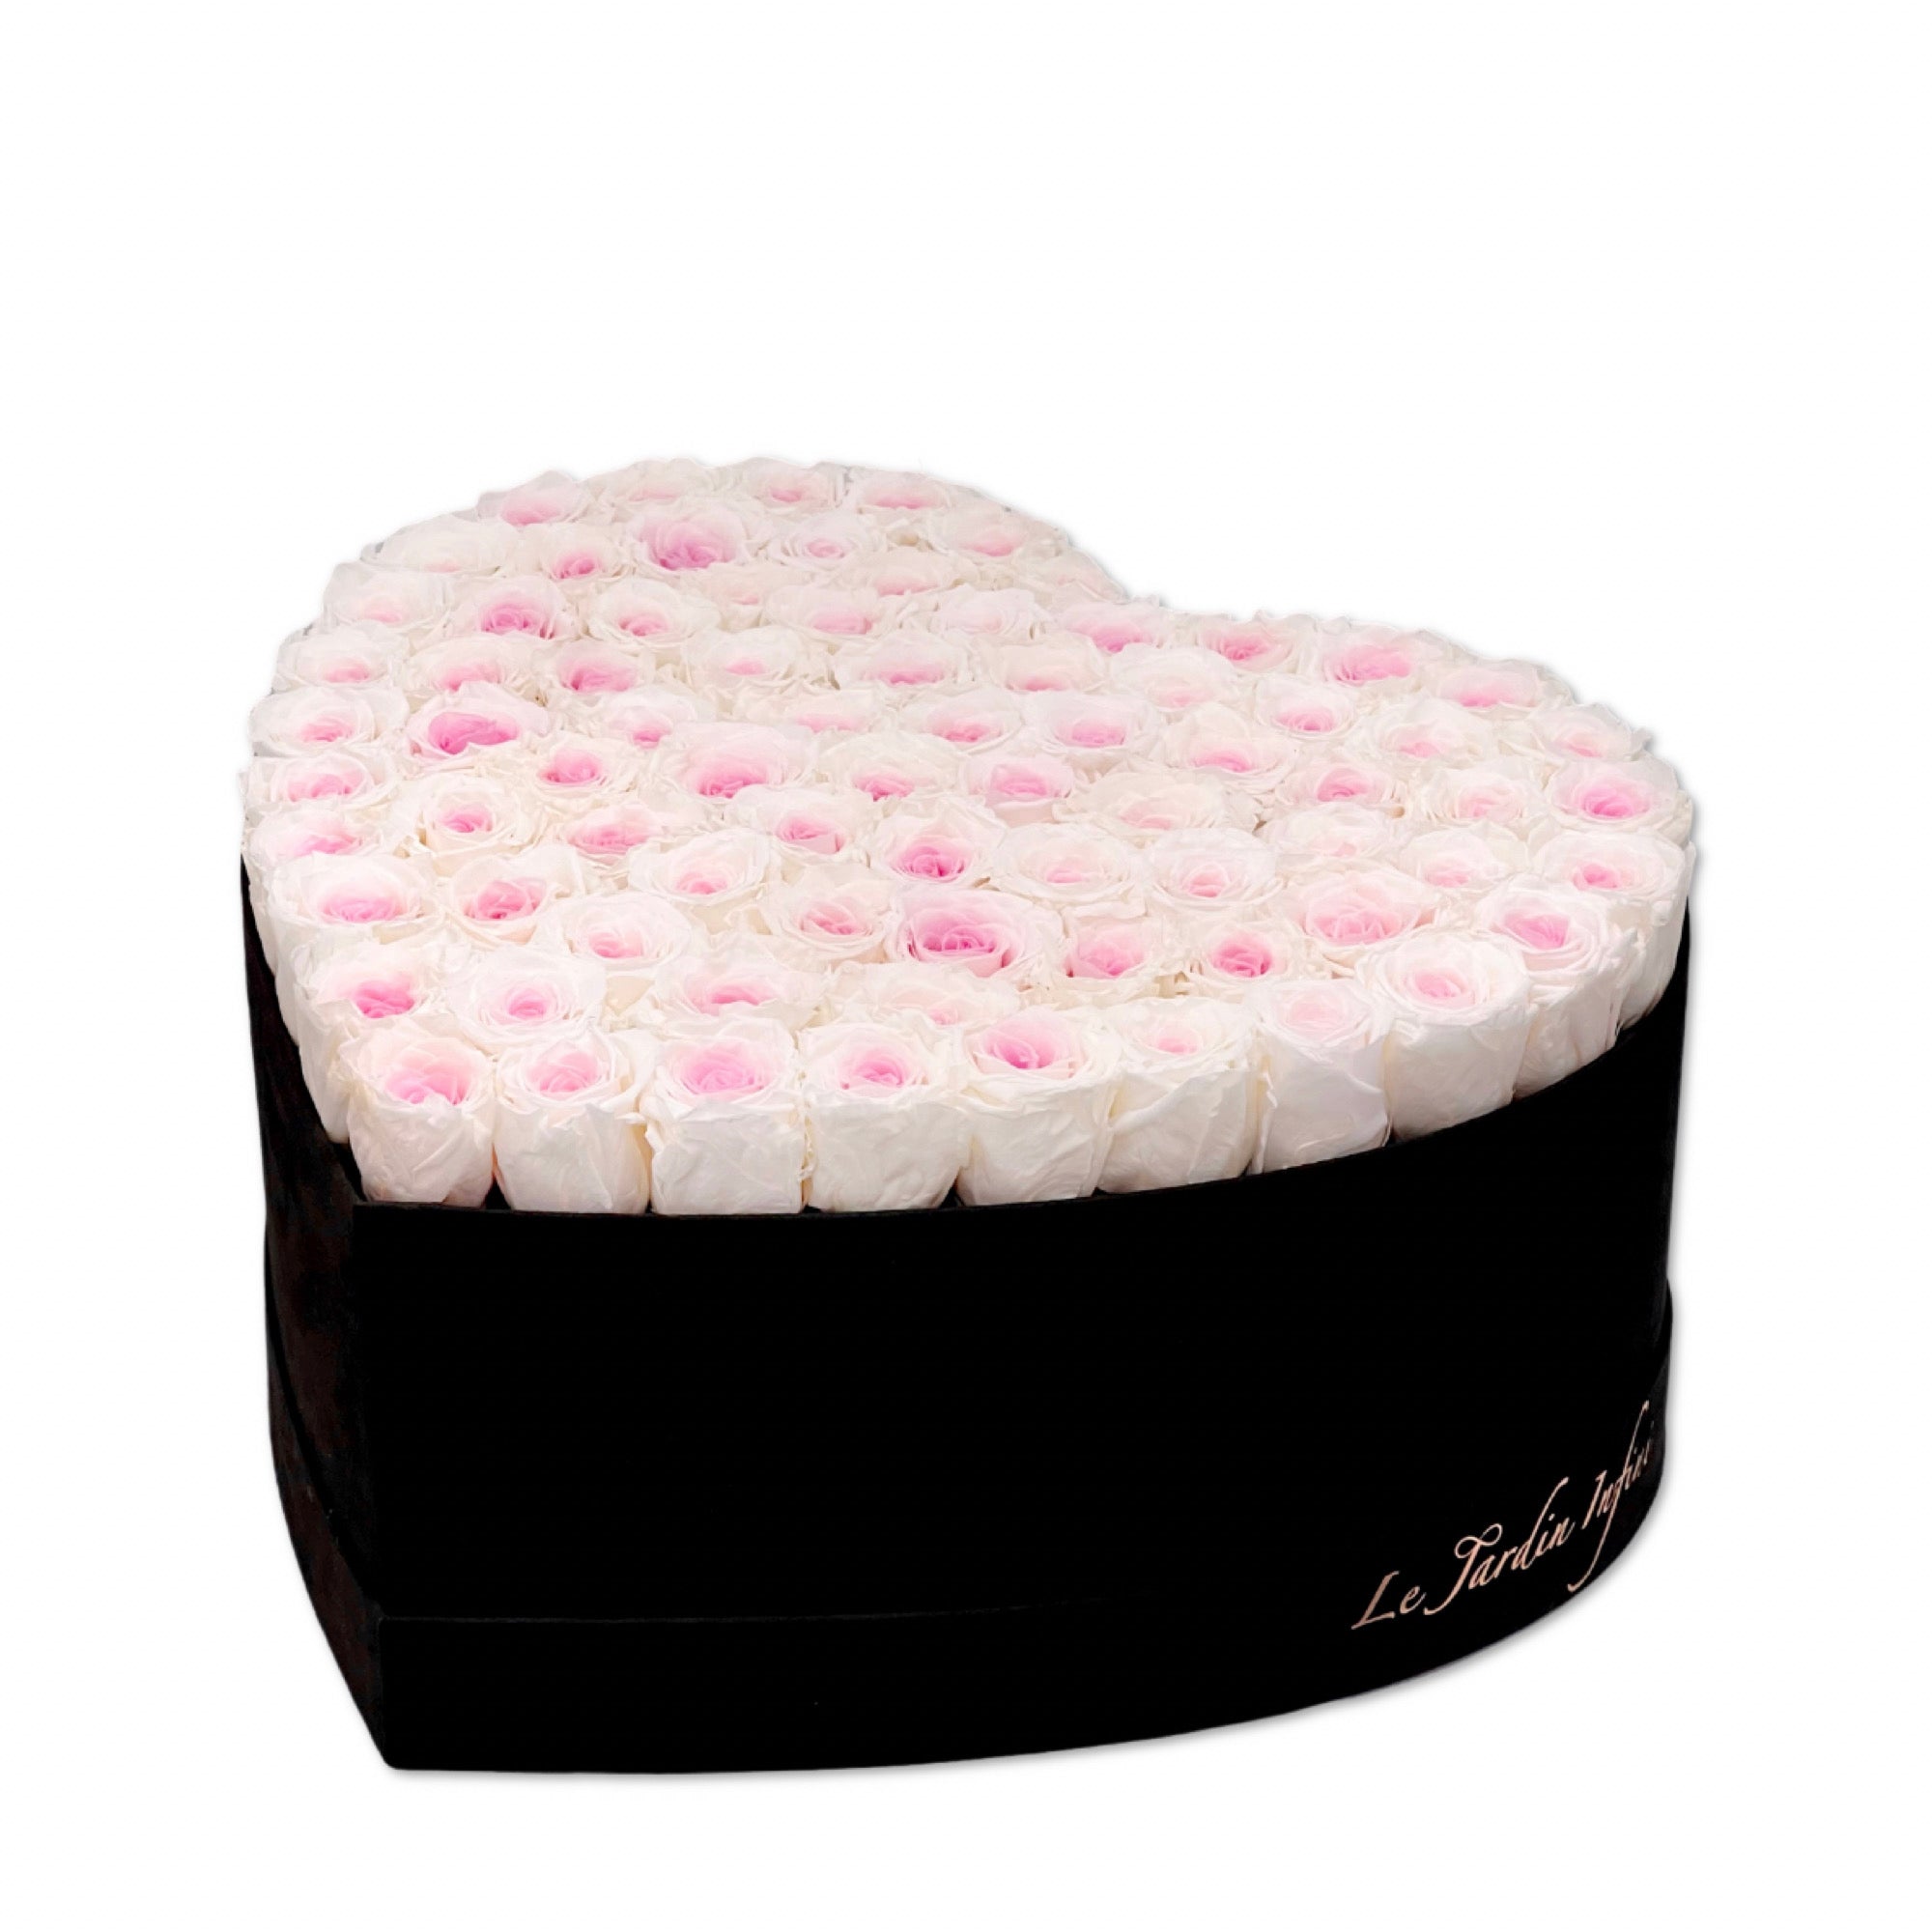 80-100 Bicolor Preserved Roses in A Heart Shaped Box- Large Heart Luxury Black Suede Box